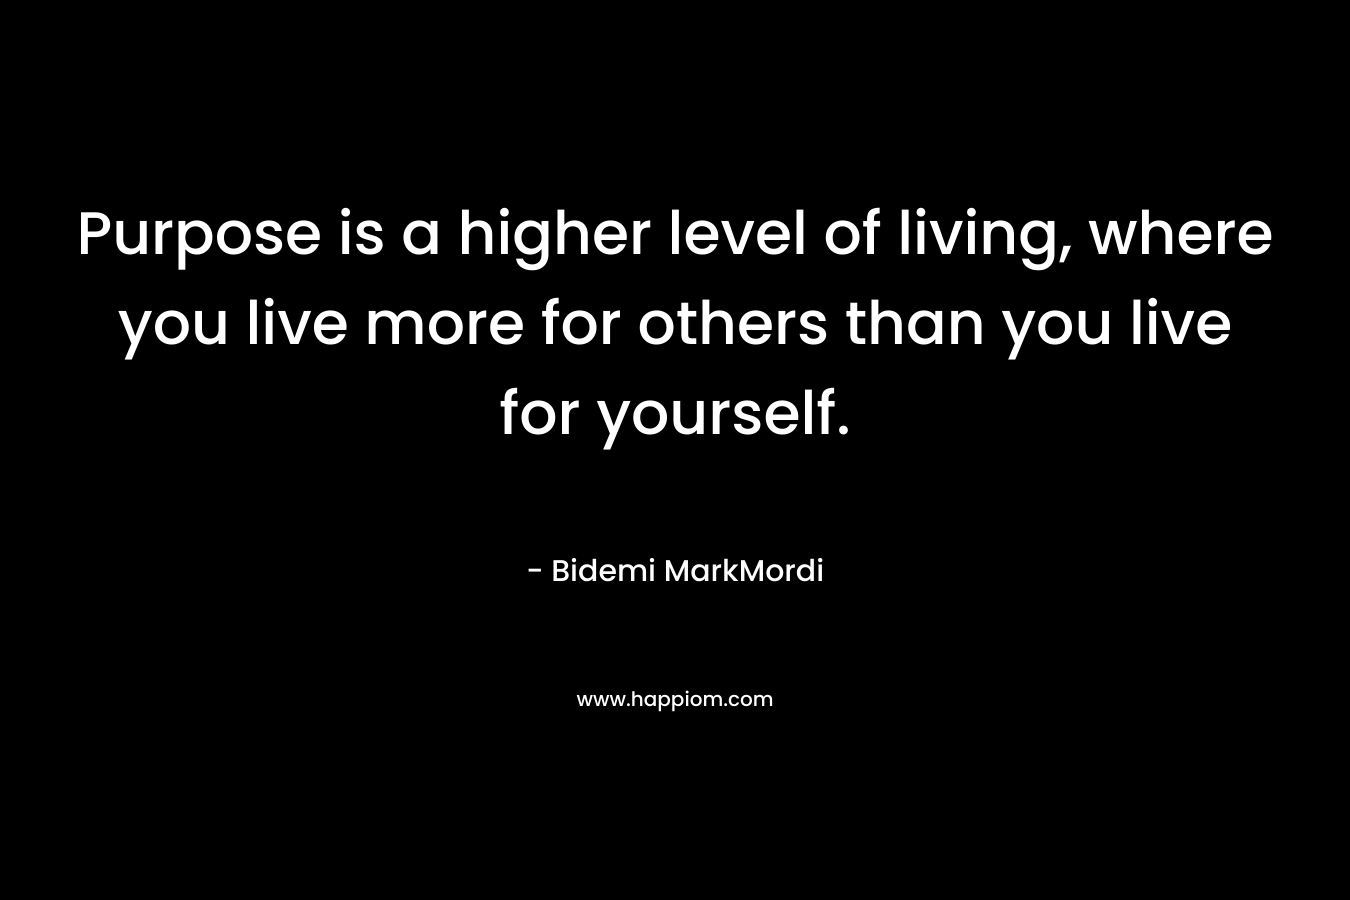 Purpose is a higher level of living, where you live more for others than you live for yourself.